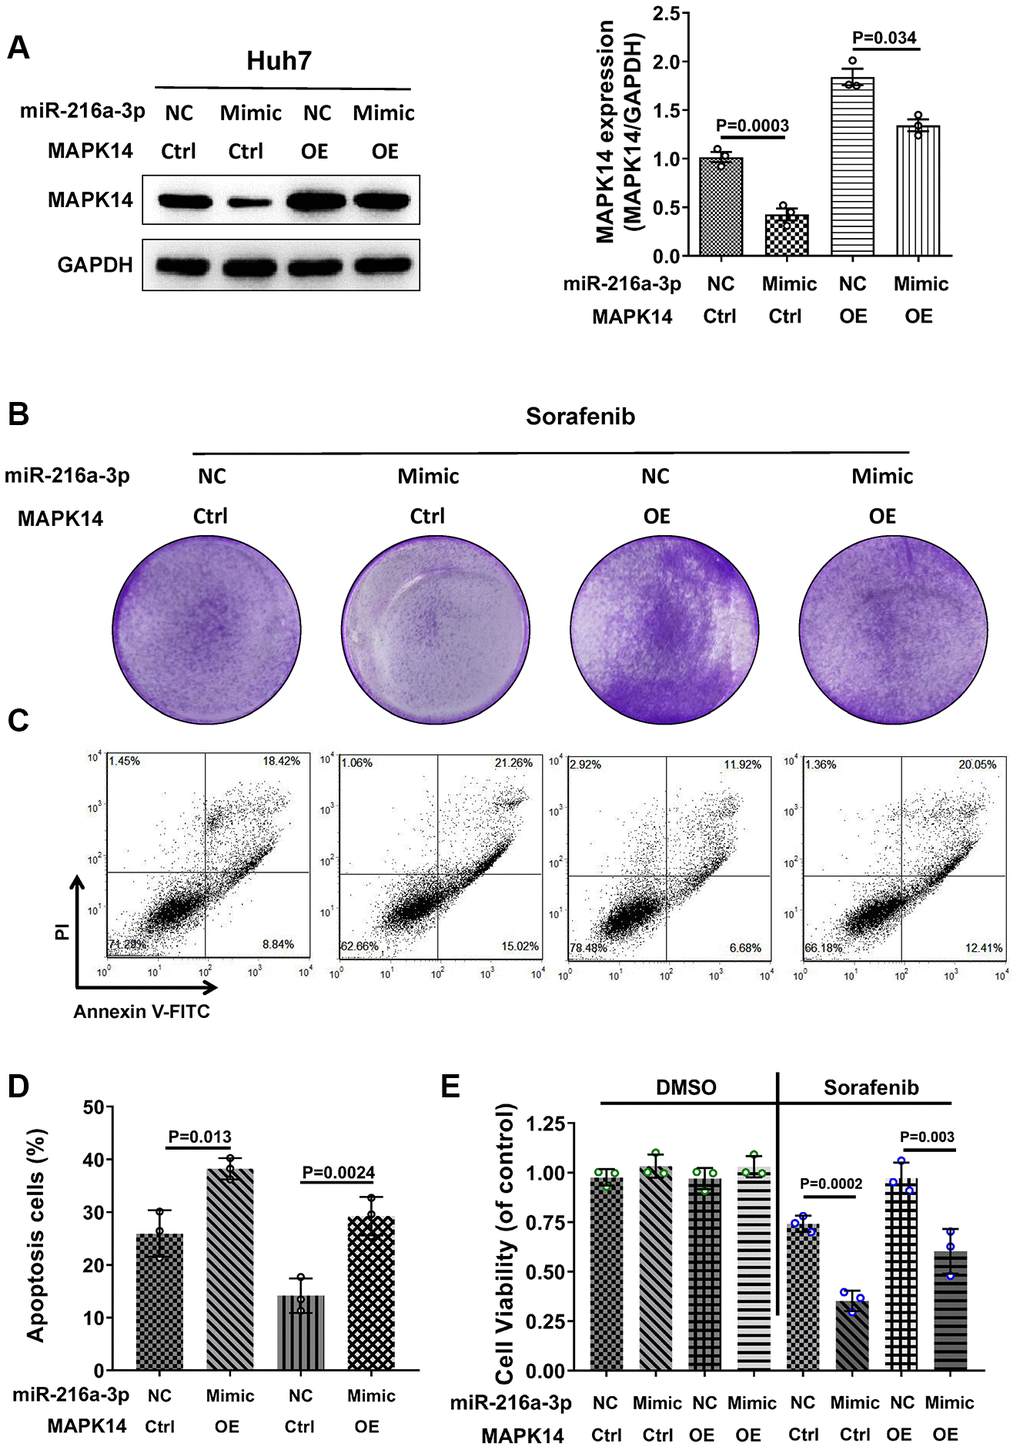 MiR-216a-3p regulates sorafenib sensitivity in HCC cells by decreasing the protein levels of MAPK14. (A) Representative western blot shows MAPK14 protein expression in control and sorafenib-treated miR-216-3p OE, MAPK14 OE or miR-216a-3p OE plus MAPK14 OE Huh-7 cells. (B) Colony formation assay results of control and sorafenib-treated miR-216-3p OE, MAPK14 OE or miR-216a-3p OE plus MAPK14 OE Huh-7 cells. (C, D) Flow cytometry assay shows percentage apoptosis in control and sorafenib-treated miR-216-3p OE, MAPK14 OE or miR-216a-3p OE plus MAPK14 OE Huh-7 cells. (E) MTT assay results show viability of control and sorafenib-treated miR-216-3p OE, MAPK14 OE or miR-216a-3p OE plus MAPK14 OE Huh-7 cells.